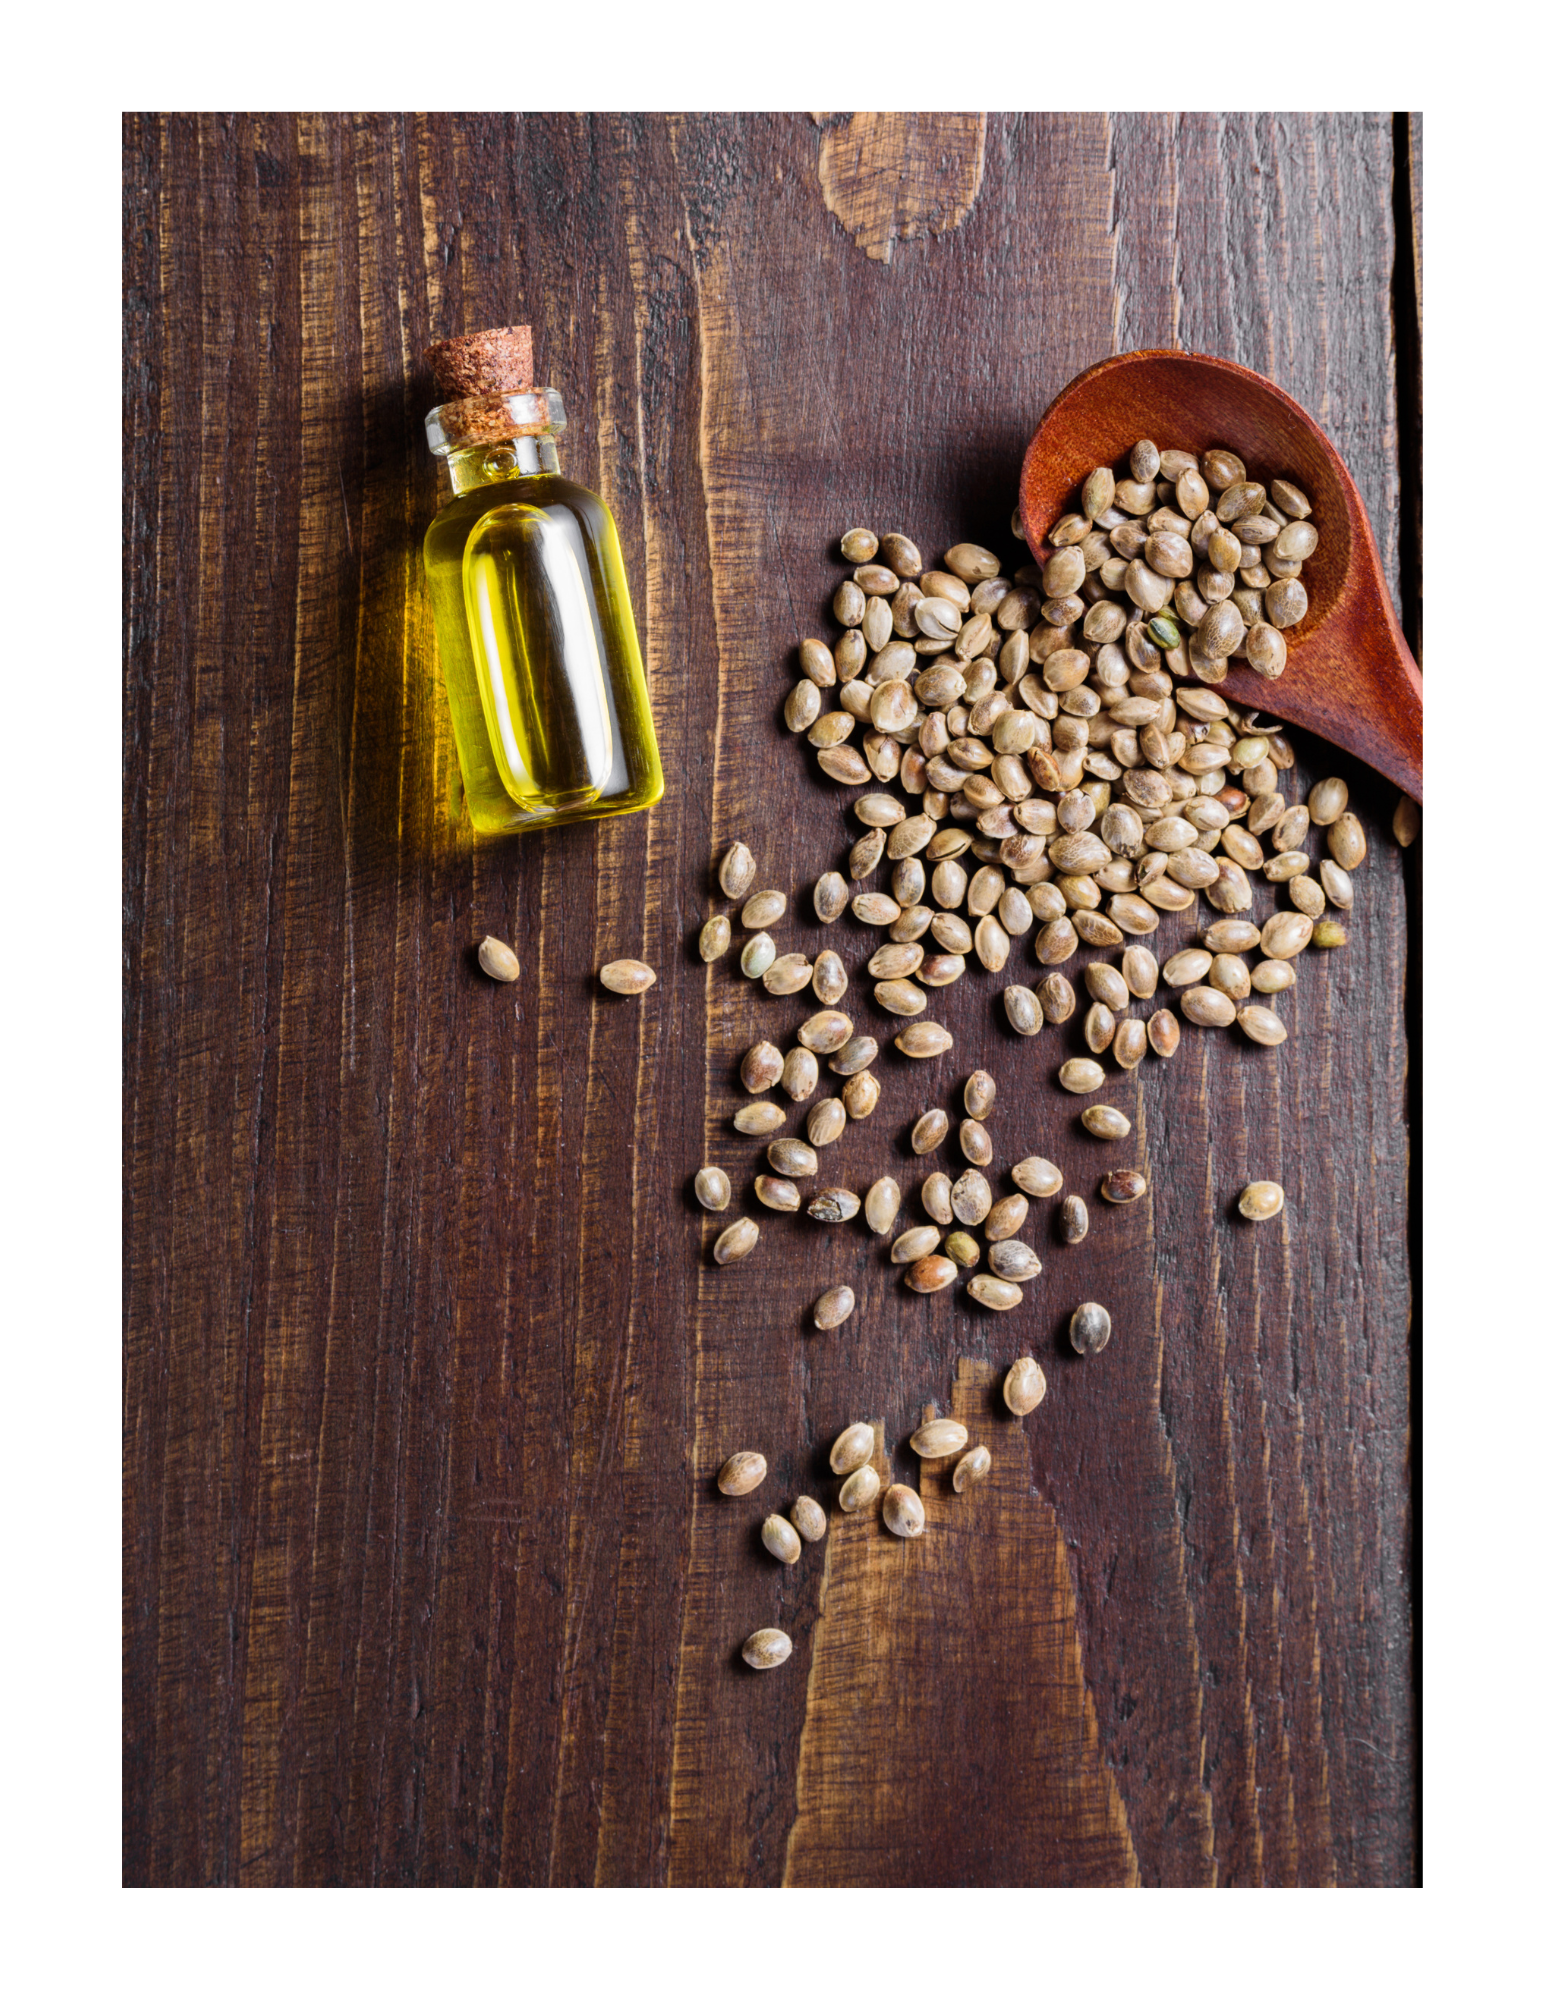 Hempseed Oil: Your Hair's Green Miracle!